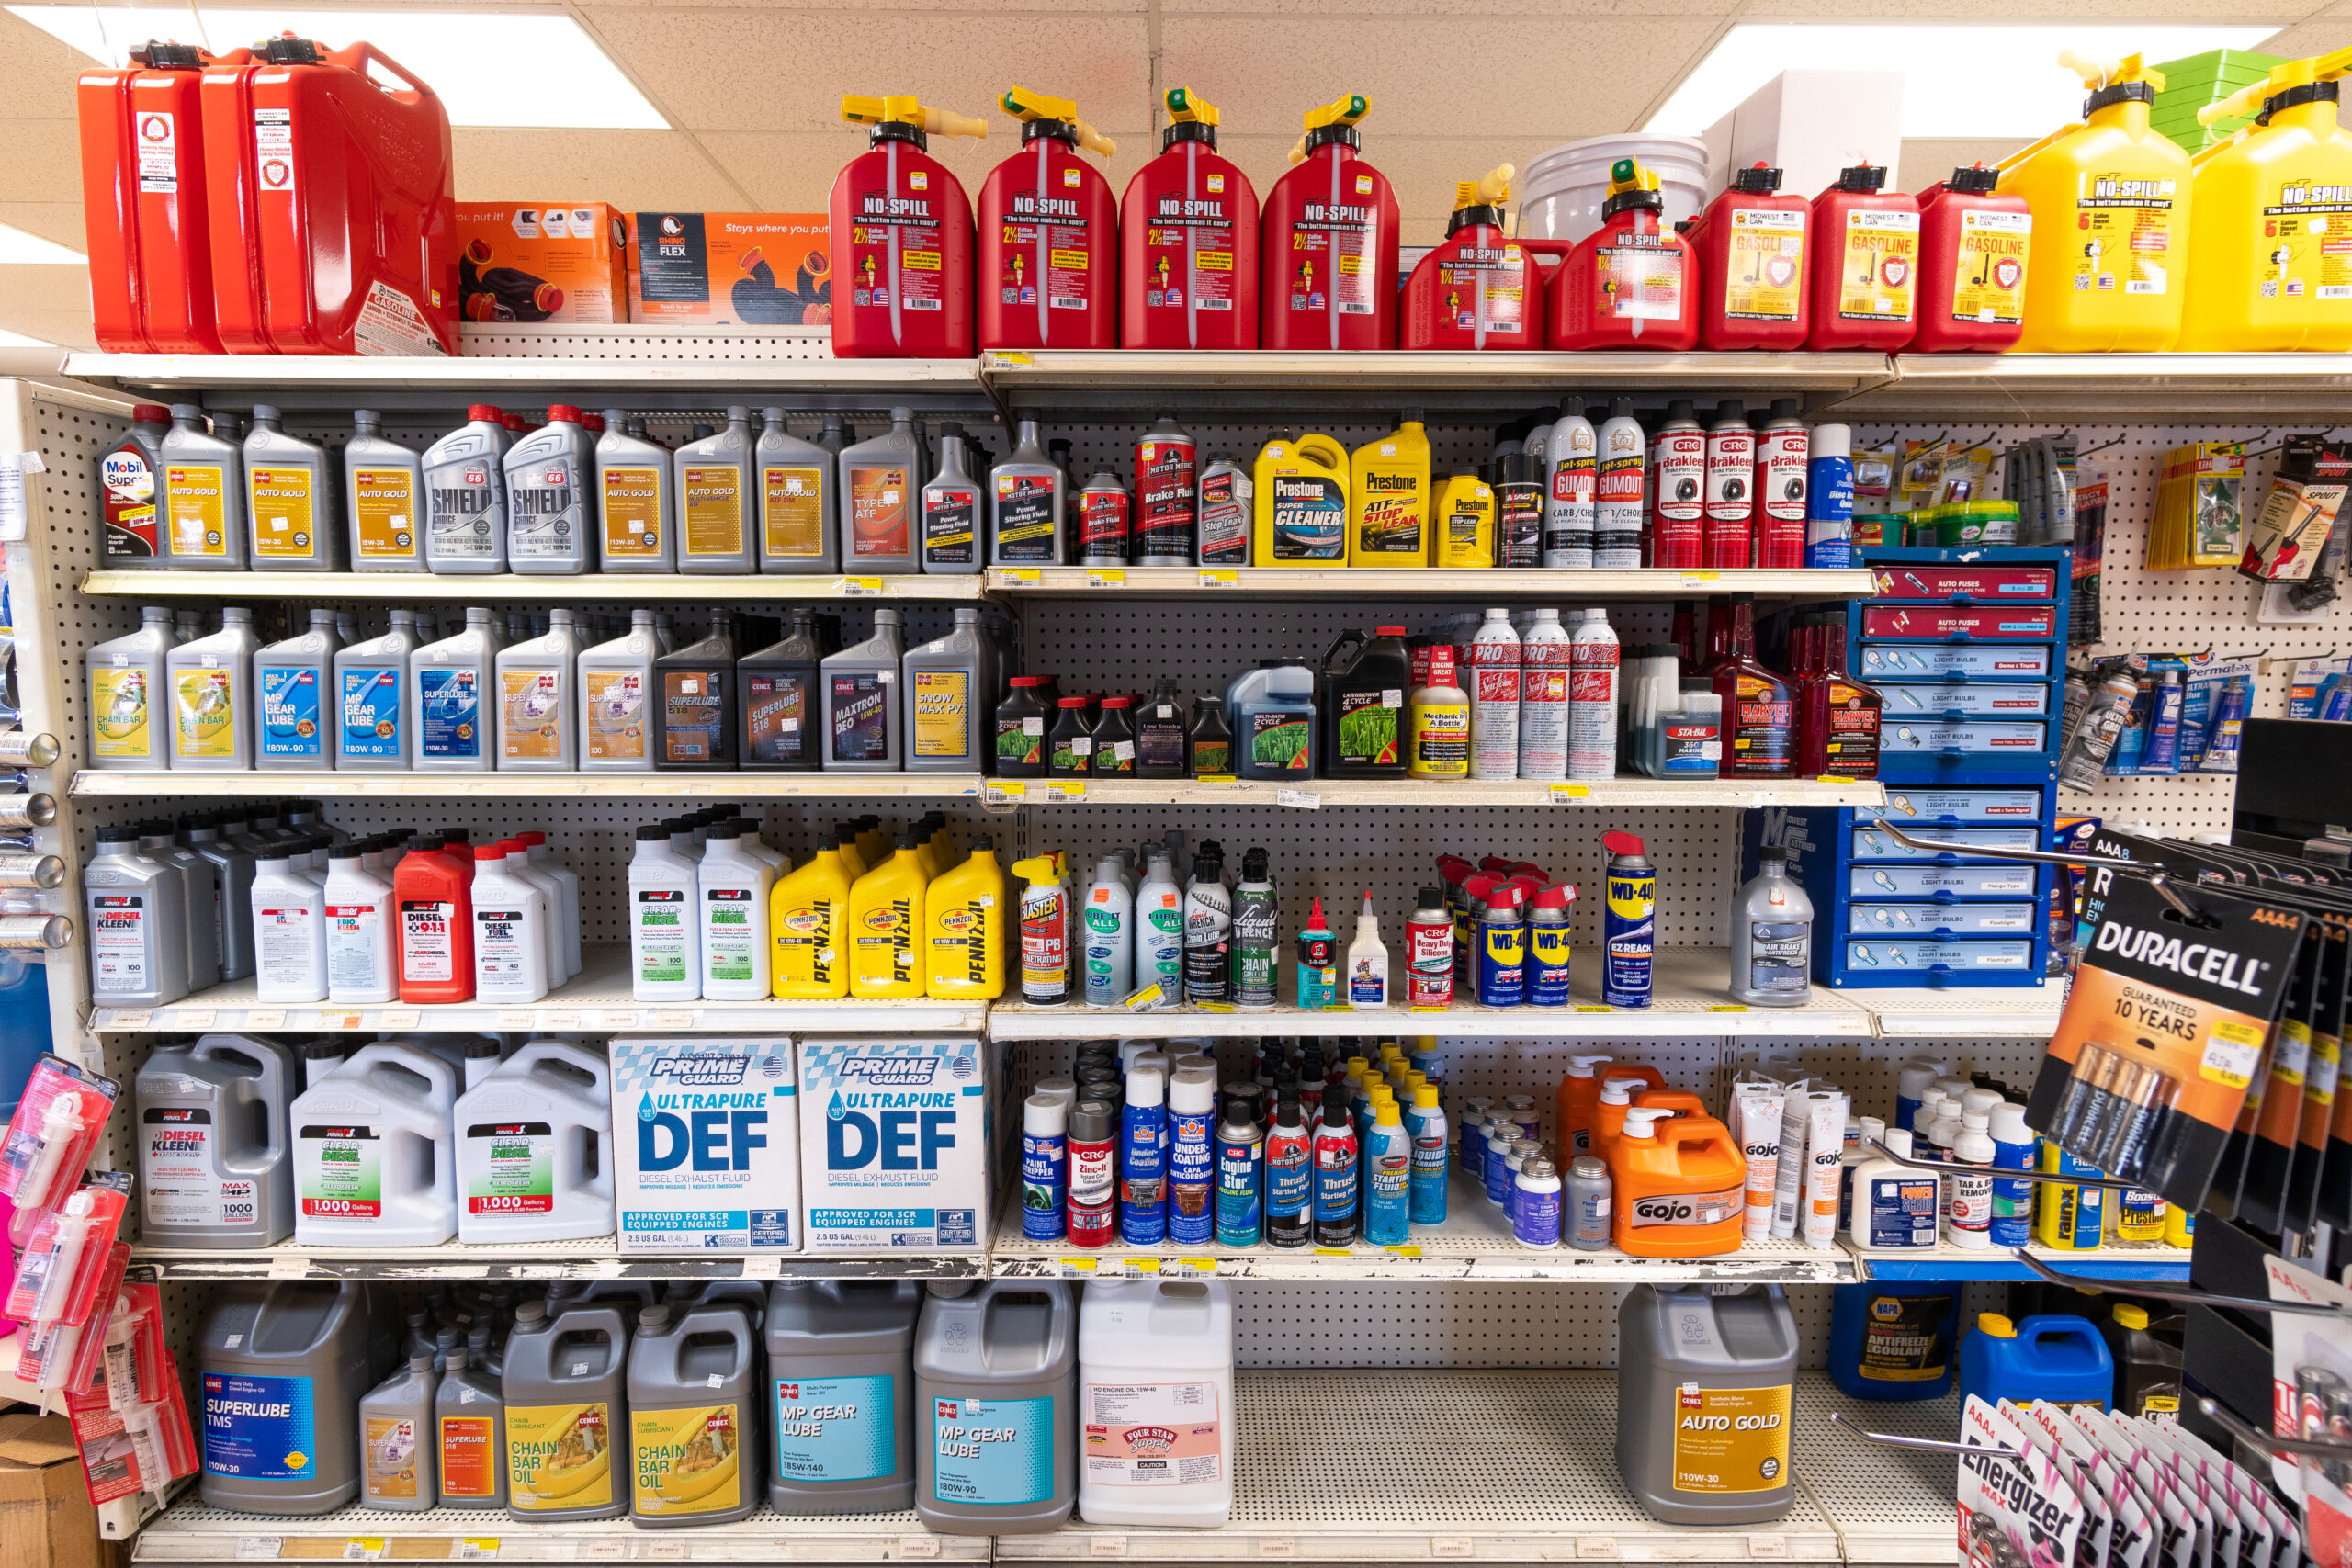 A shelf at Four Star containing brands like Cenex, Mobil, & Pennzoil